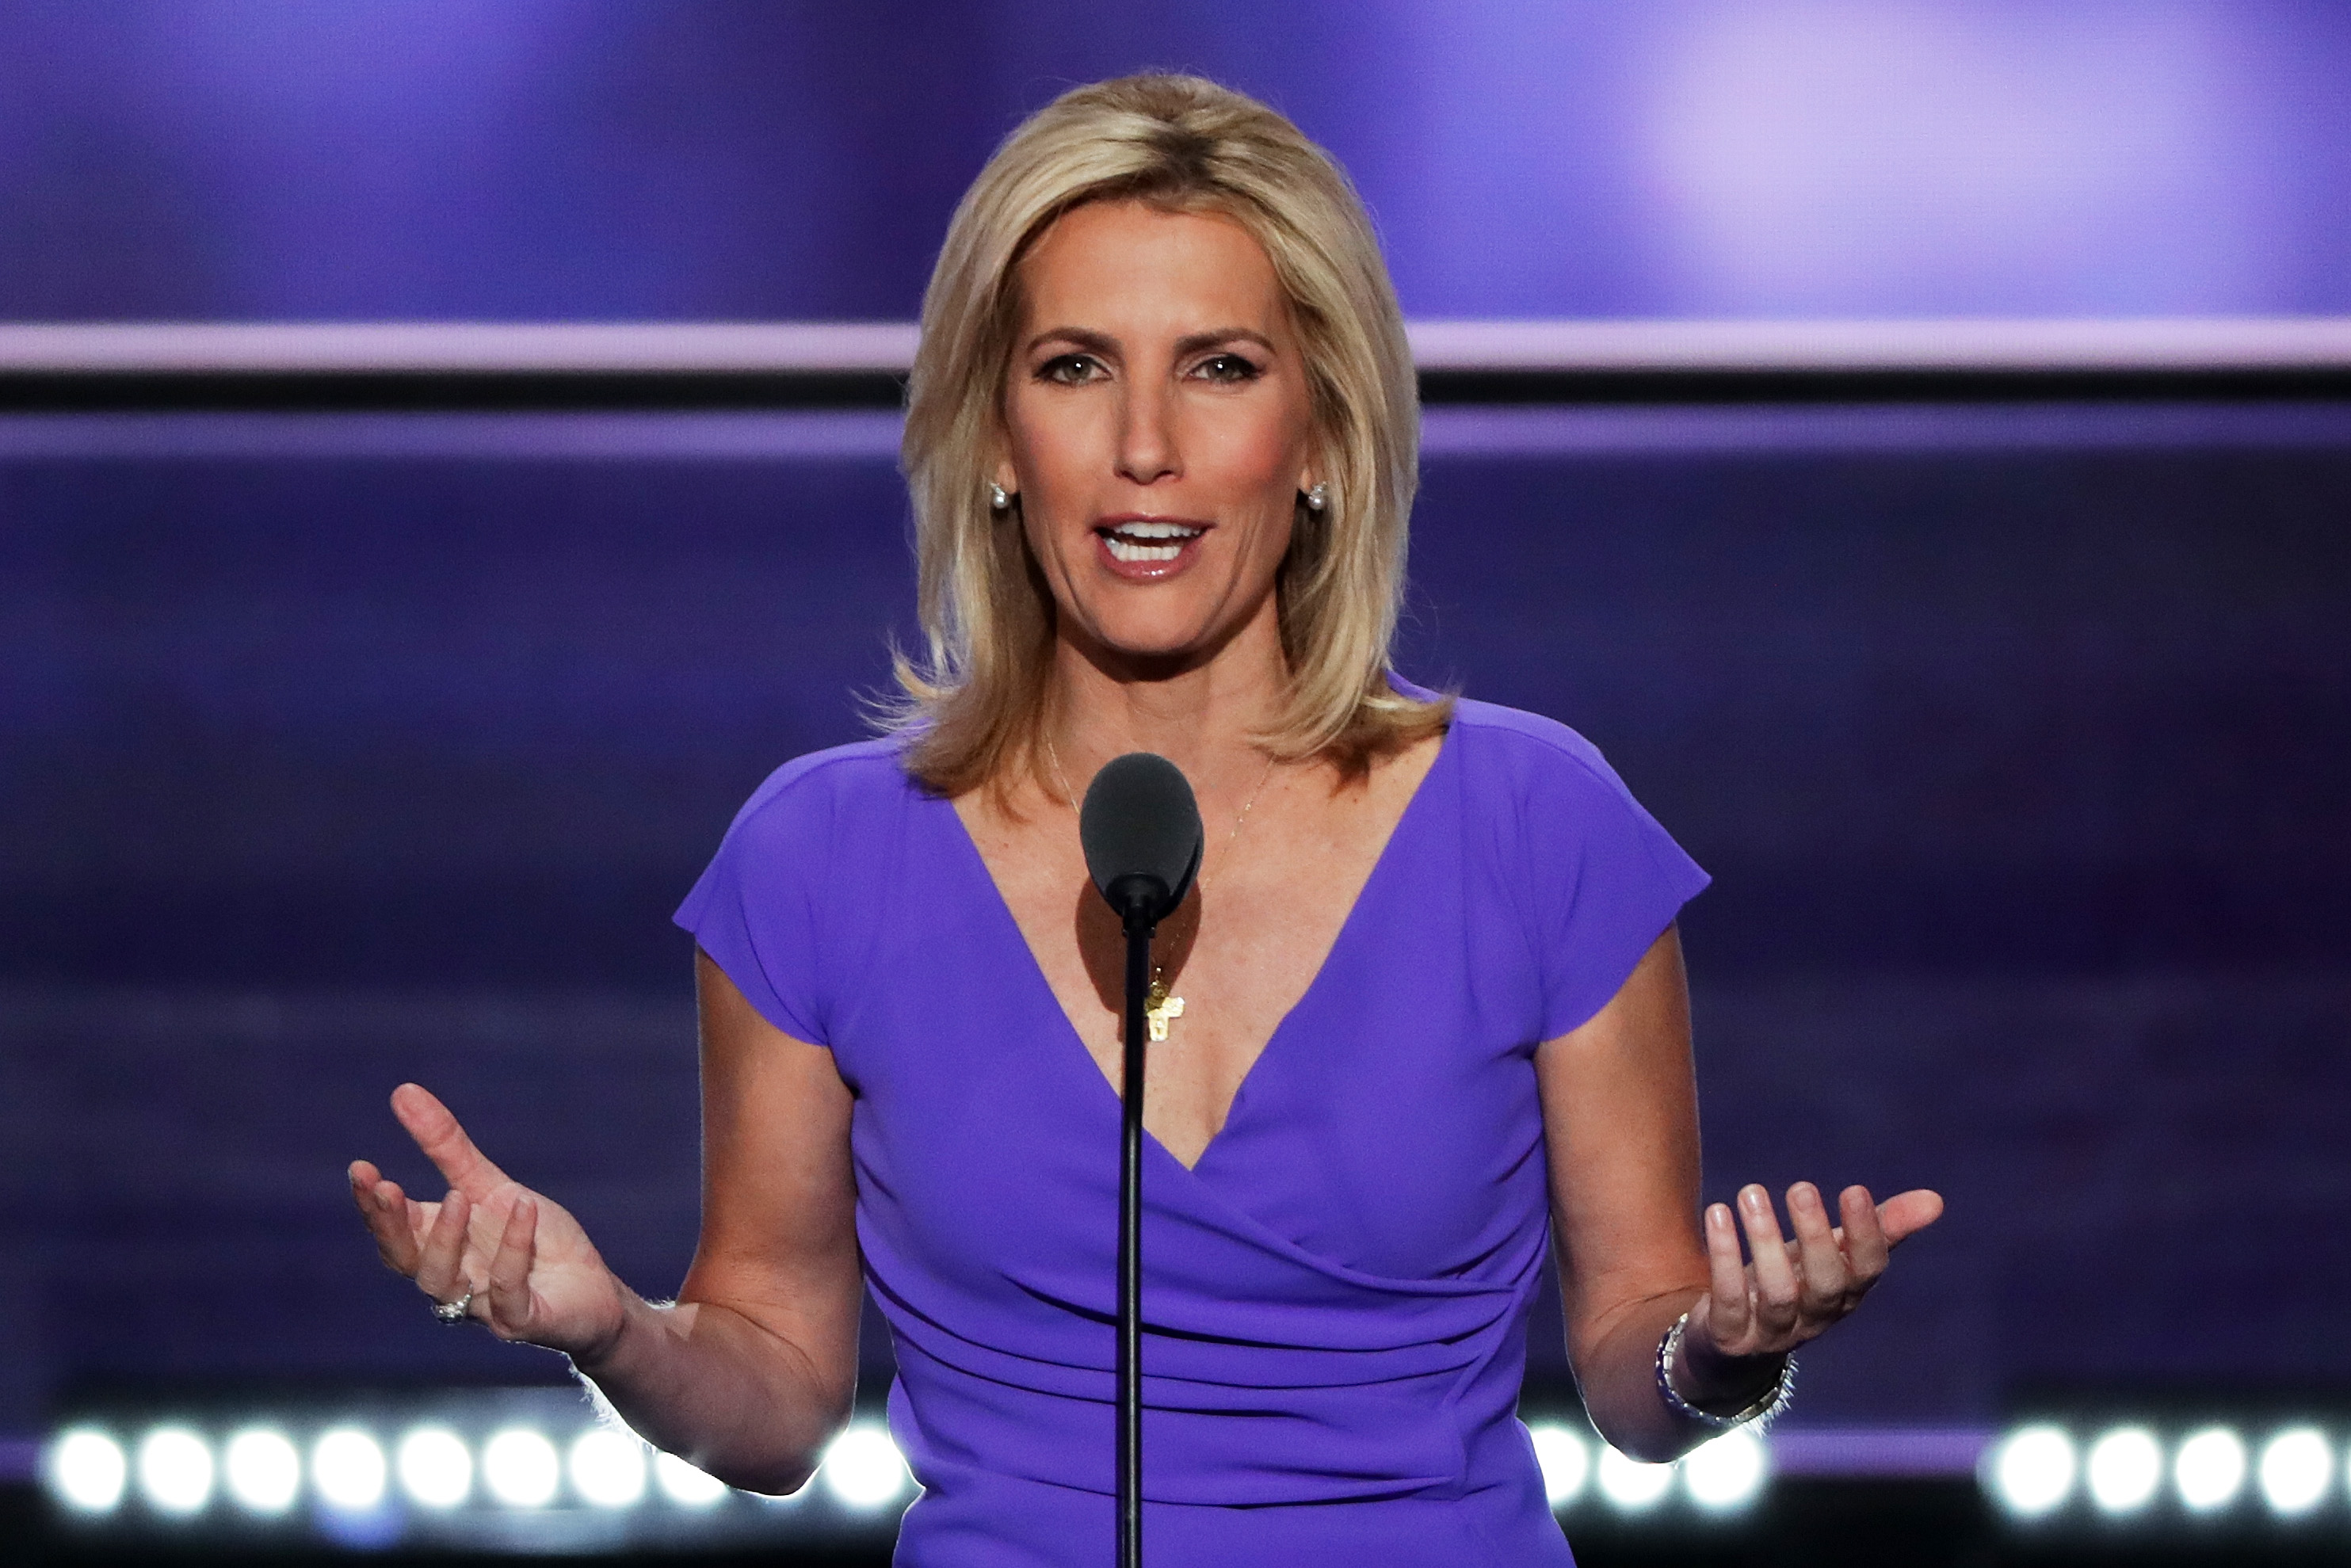 Political talk radio host Laura Ingraham delivers a speech at the Republican National Convention on July 20, 2016 in Cleveland, Ohio. (Alex Wong&mdash;Getty Images)